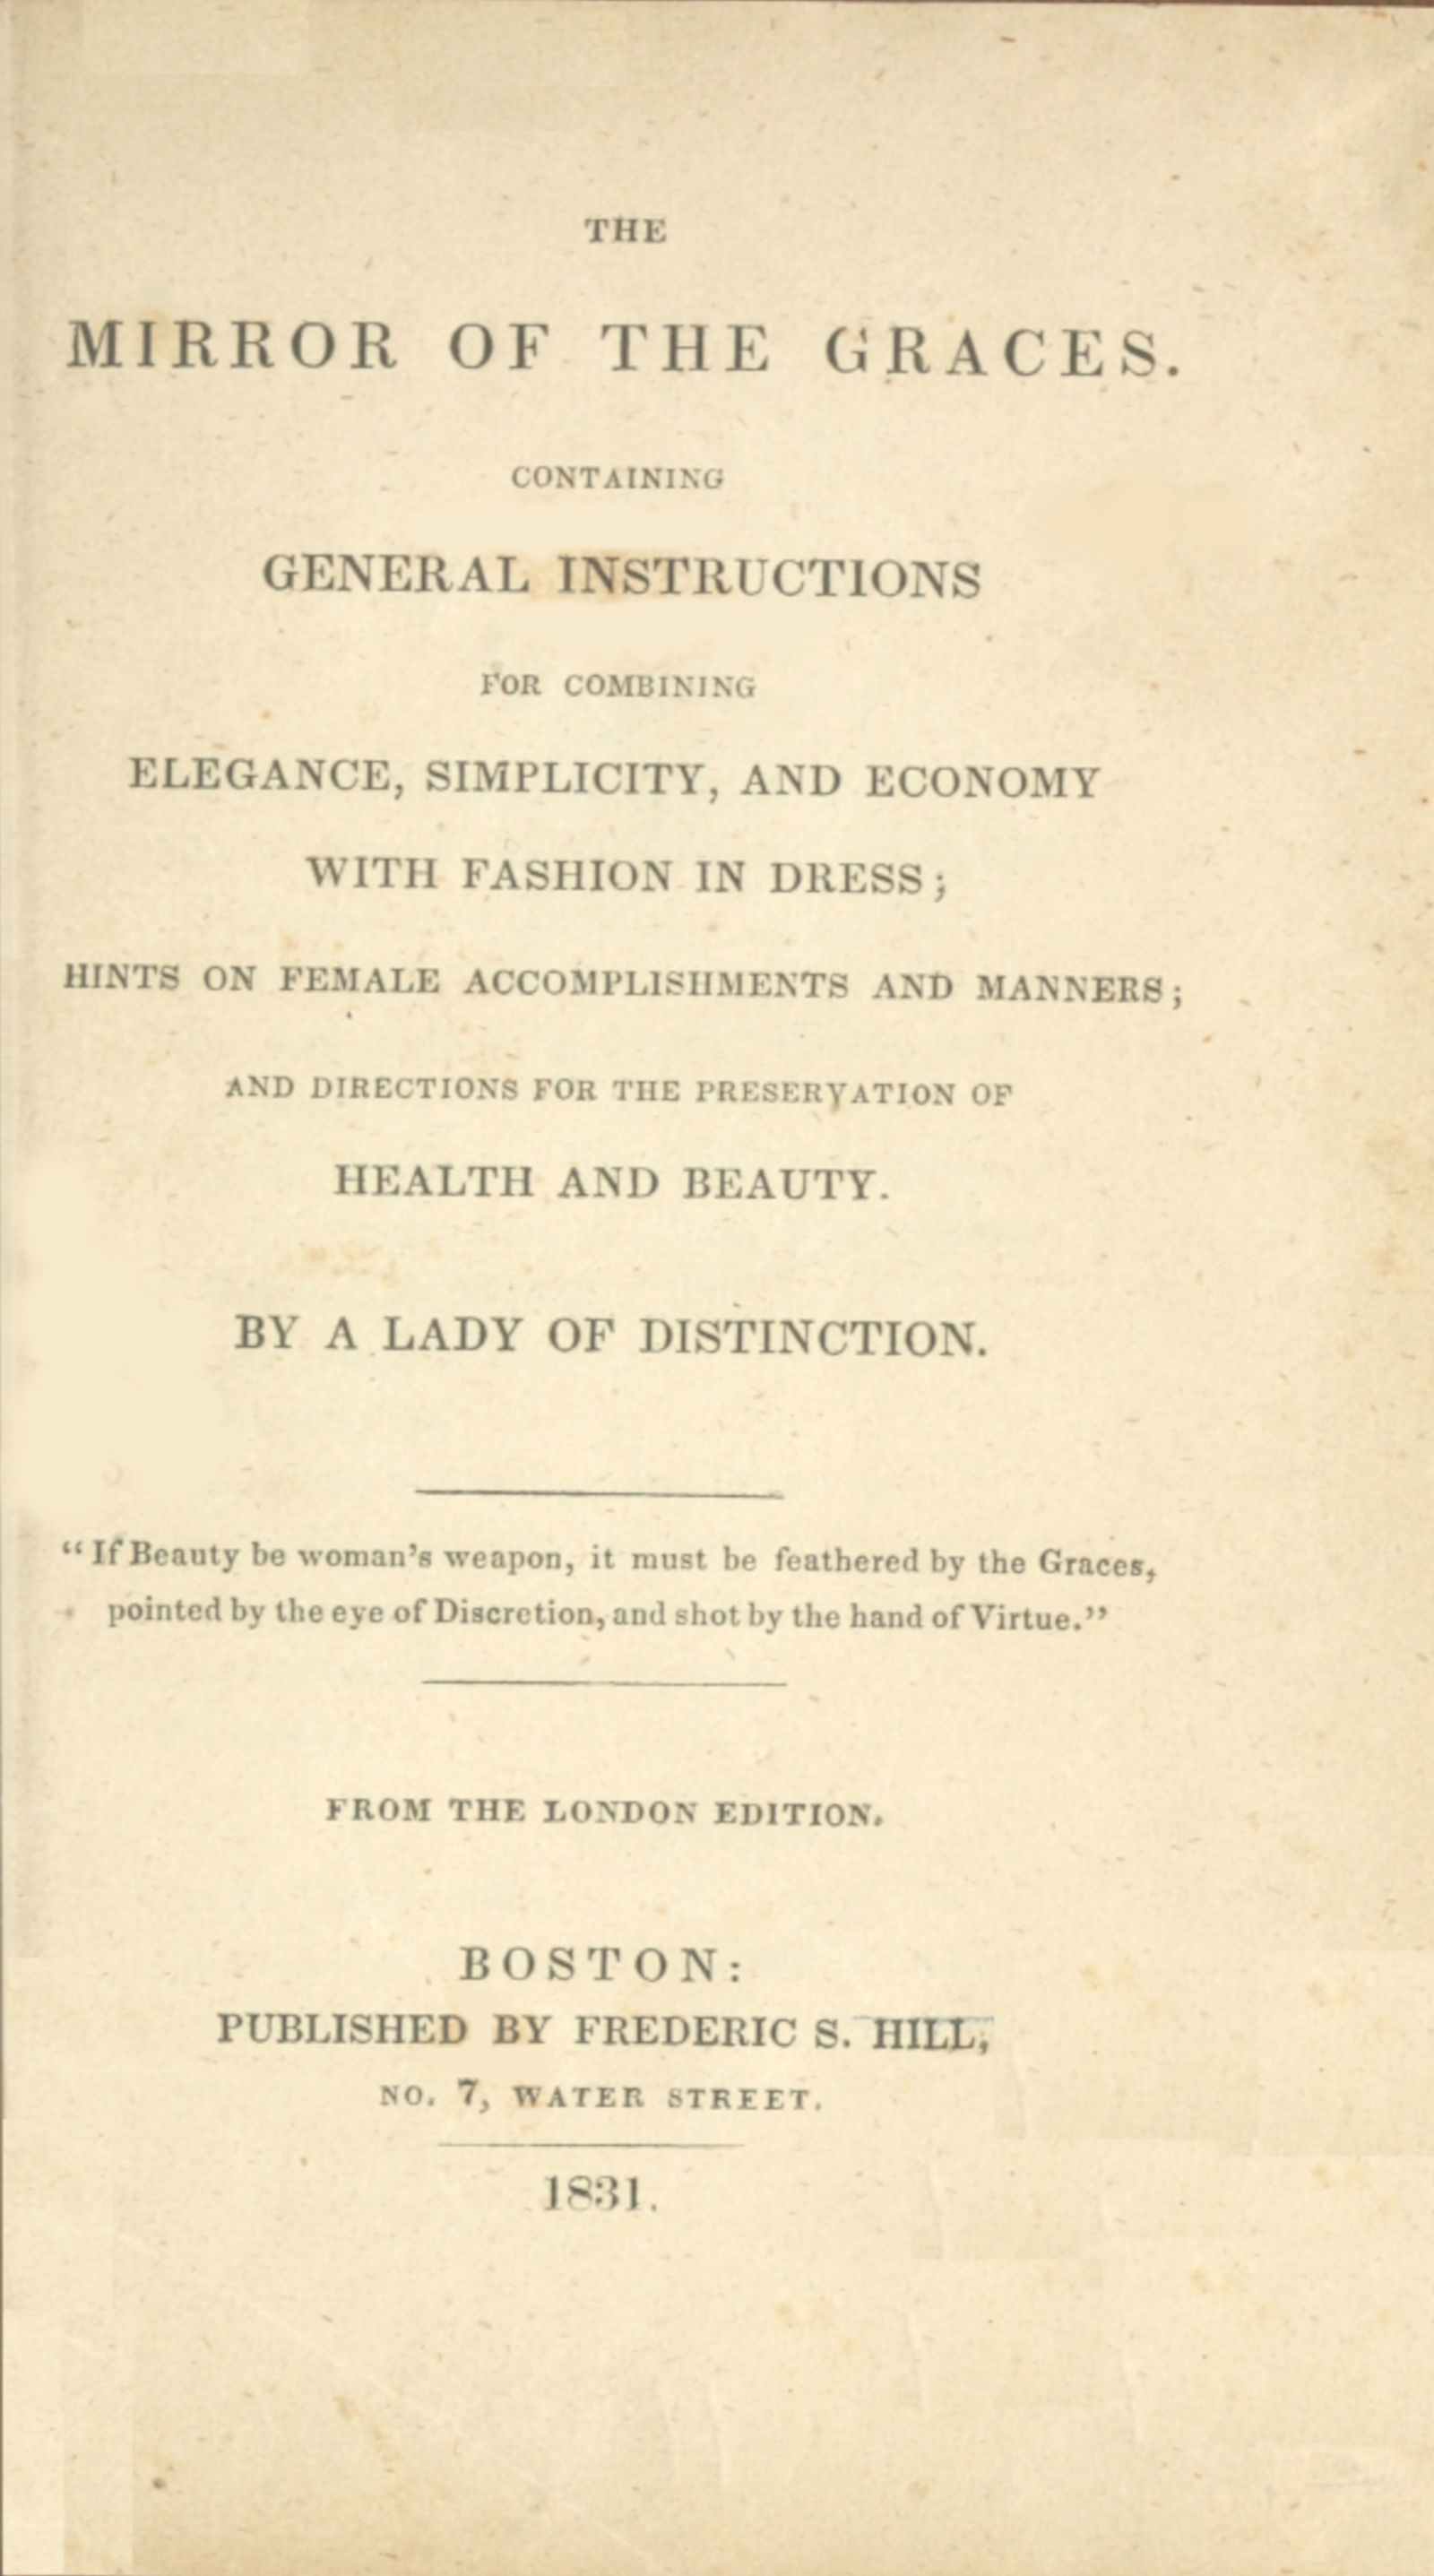 The Mirror of the Graces&#10;Containing General Instructions for Combining Elegance, Simplicity, and Economy with Fashion in Dress; Hints on Female Accomplishments and Manners; and Directions for the Preservation of Health and Beauty